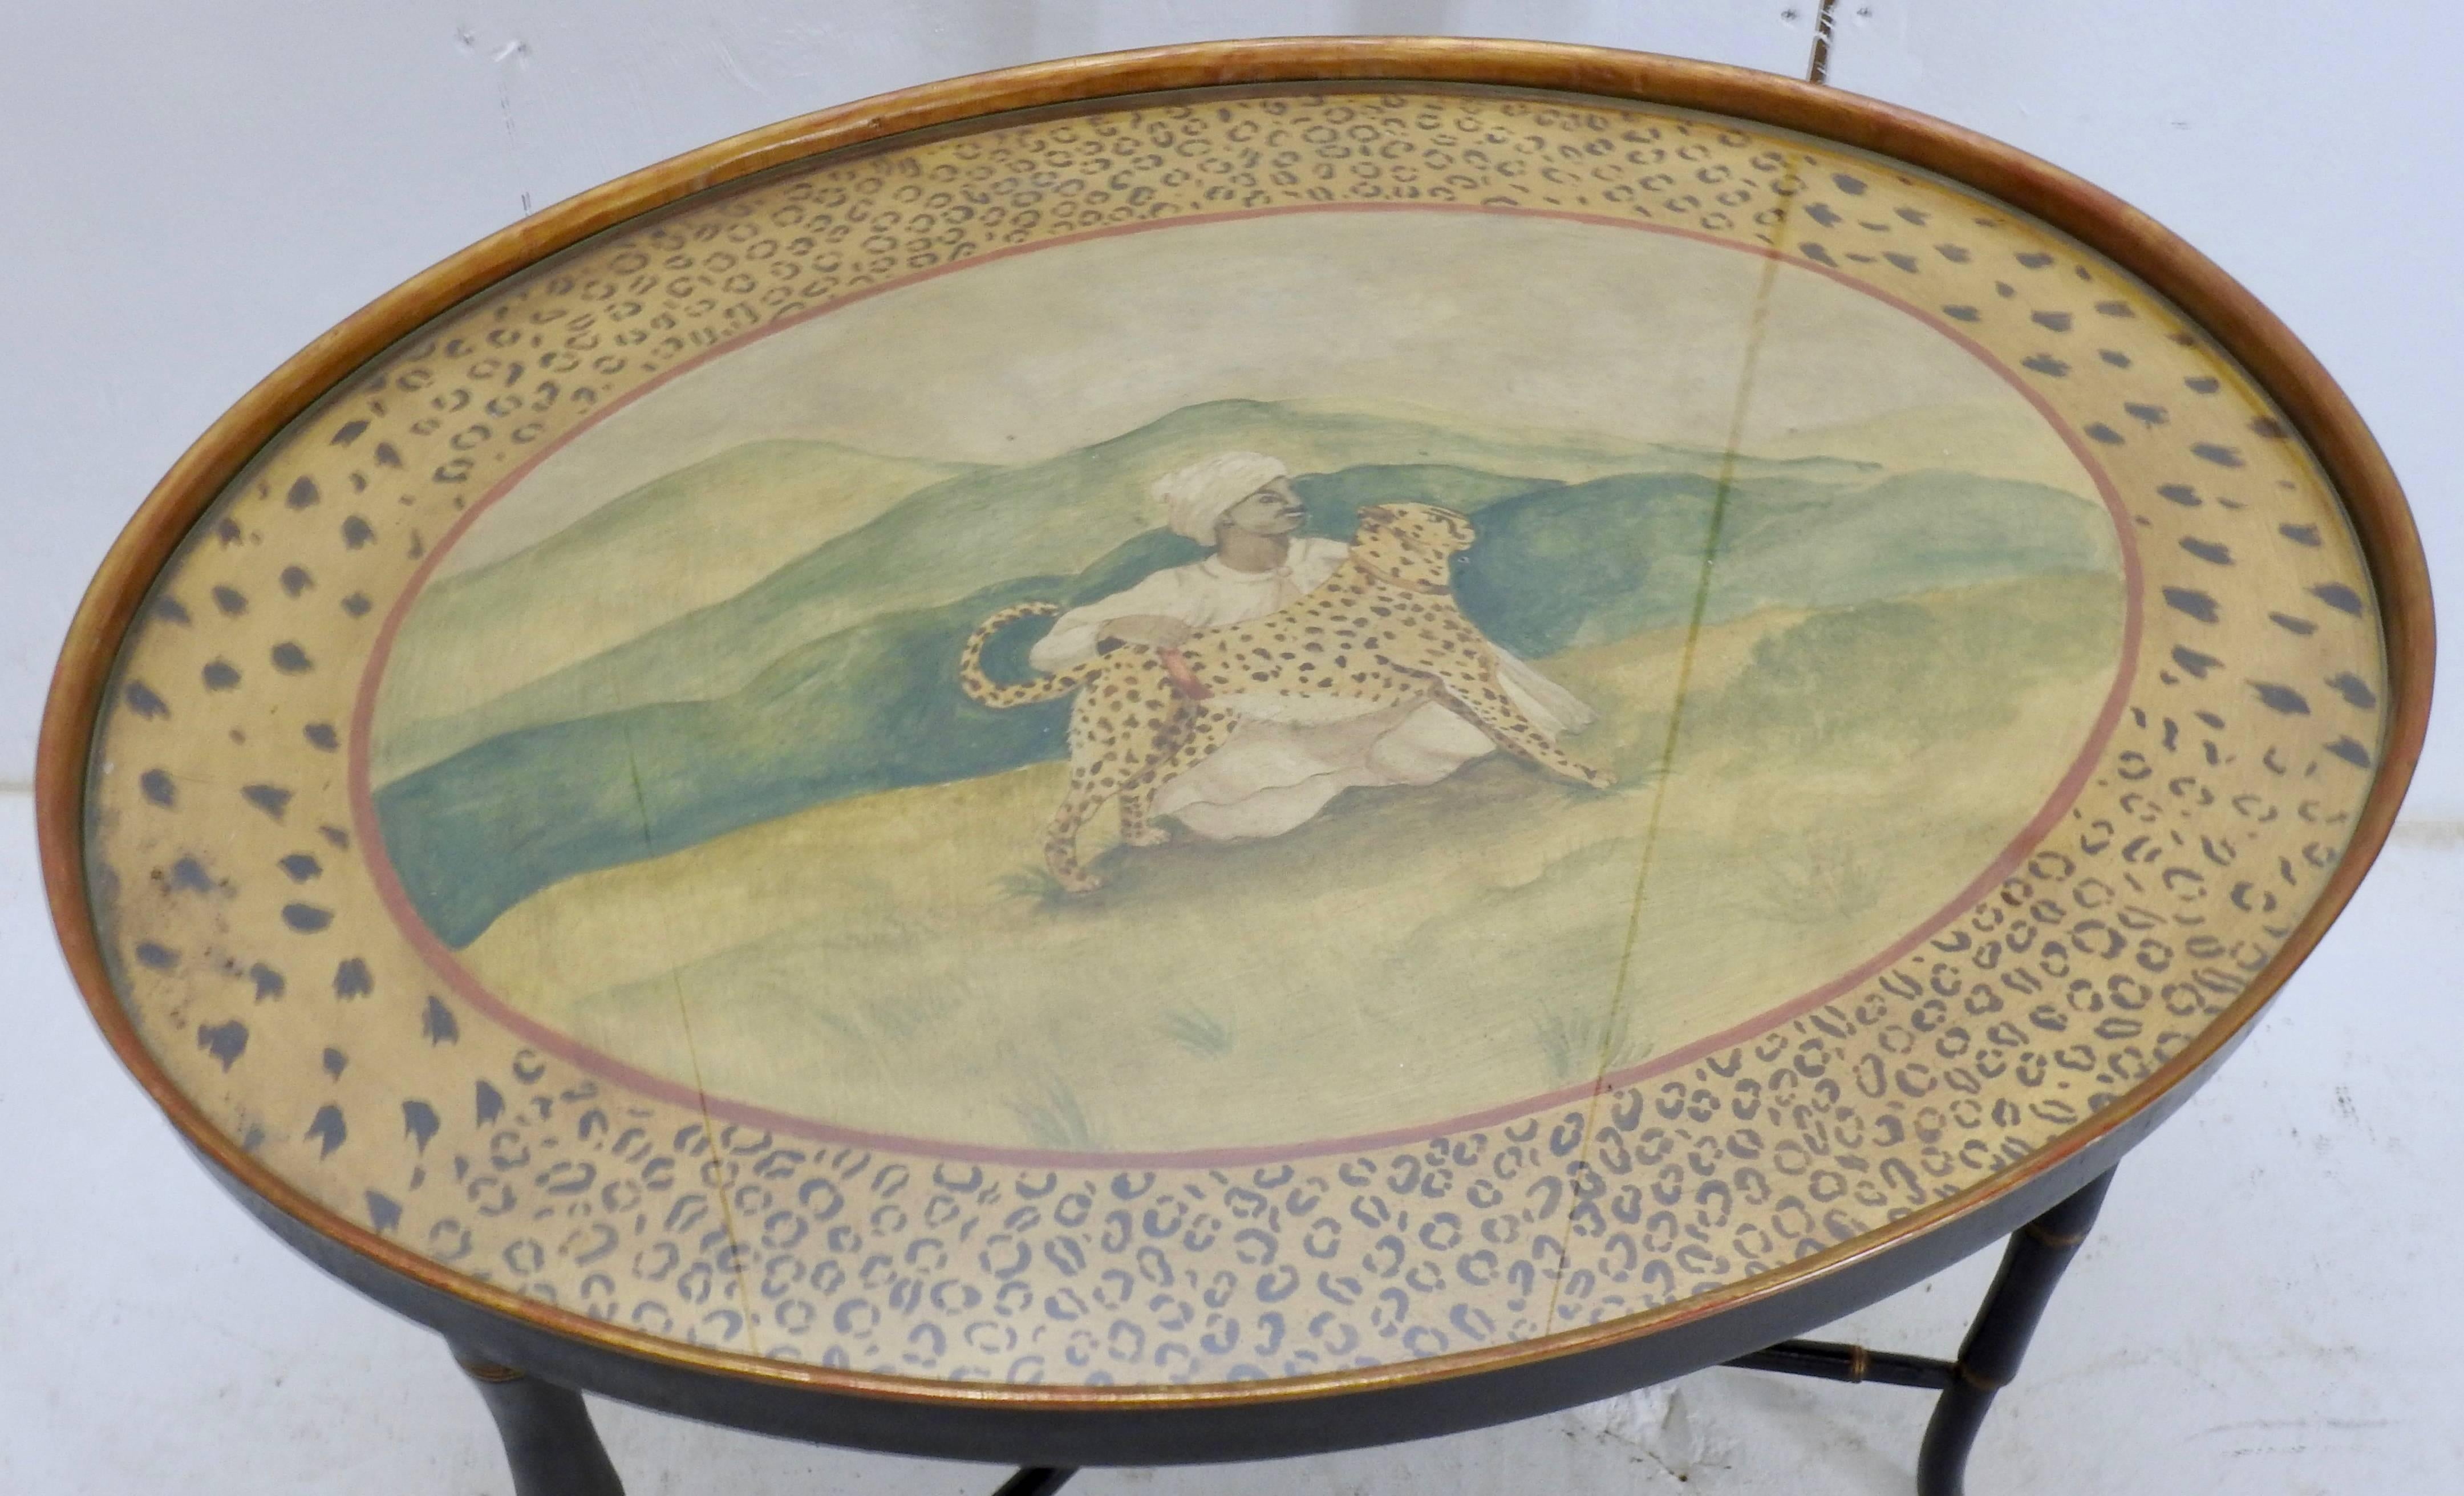 Elegant Chippendale style wooden legs are painted black with gold accents to support the hand painted oval top. The painting has a man with a turban petting a leopard and the perimeter is surrounded by leopard spots.